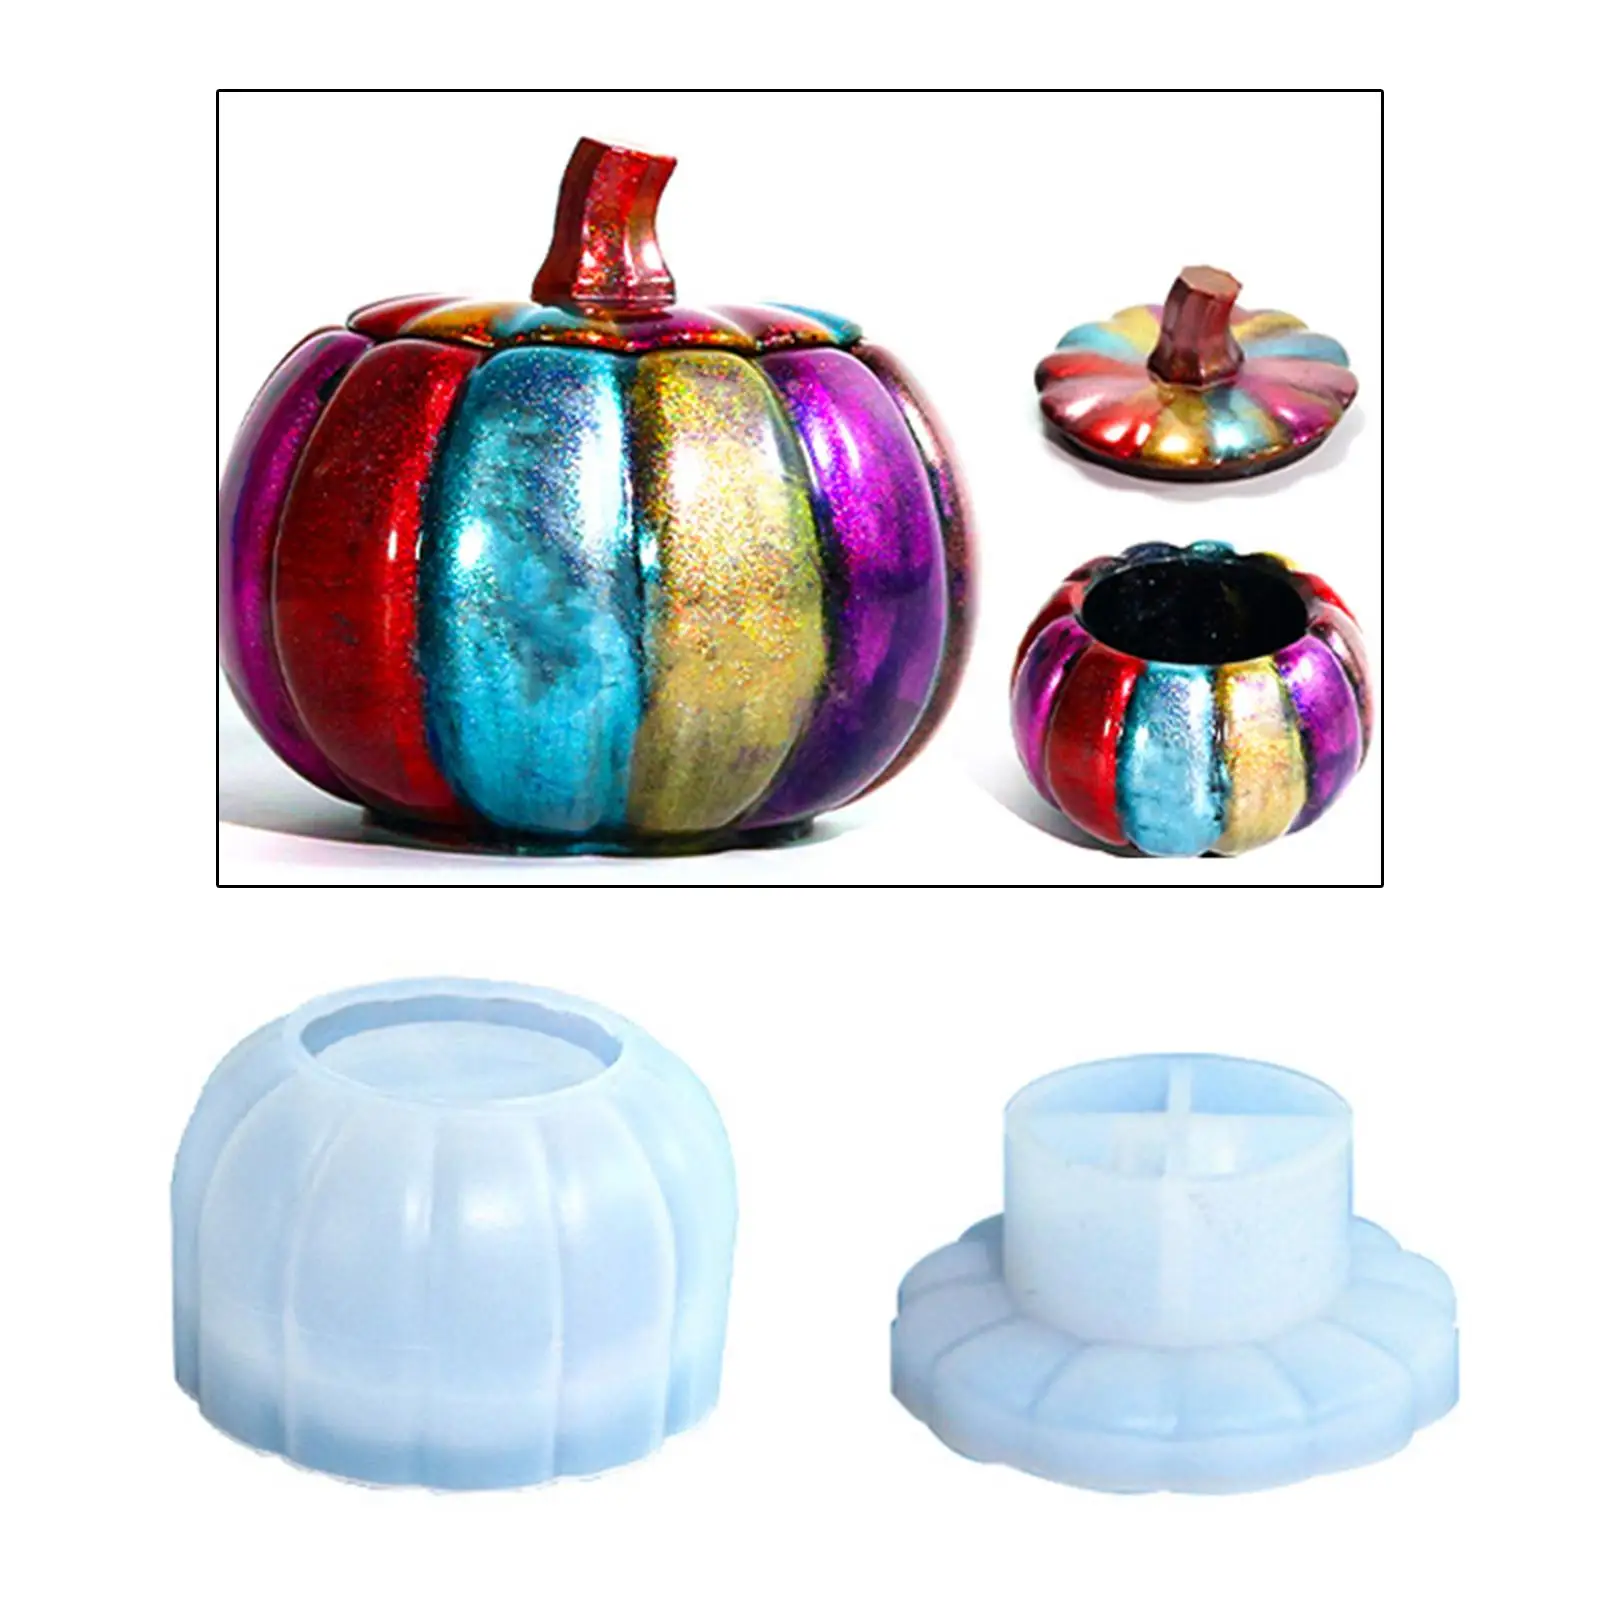 Resin Casting Mould Candy Jar Soap Crafts Silicone Jewelry Box Mould